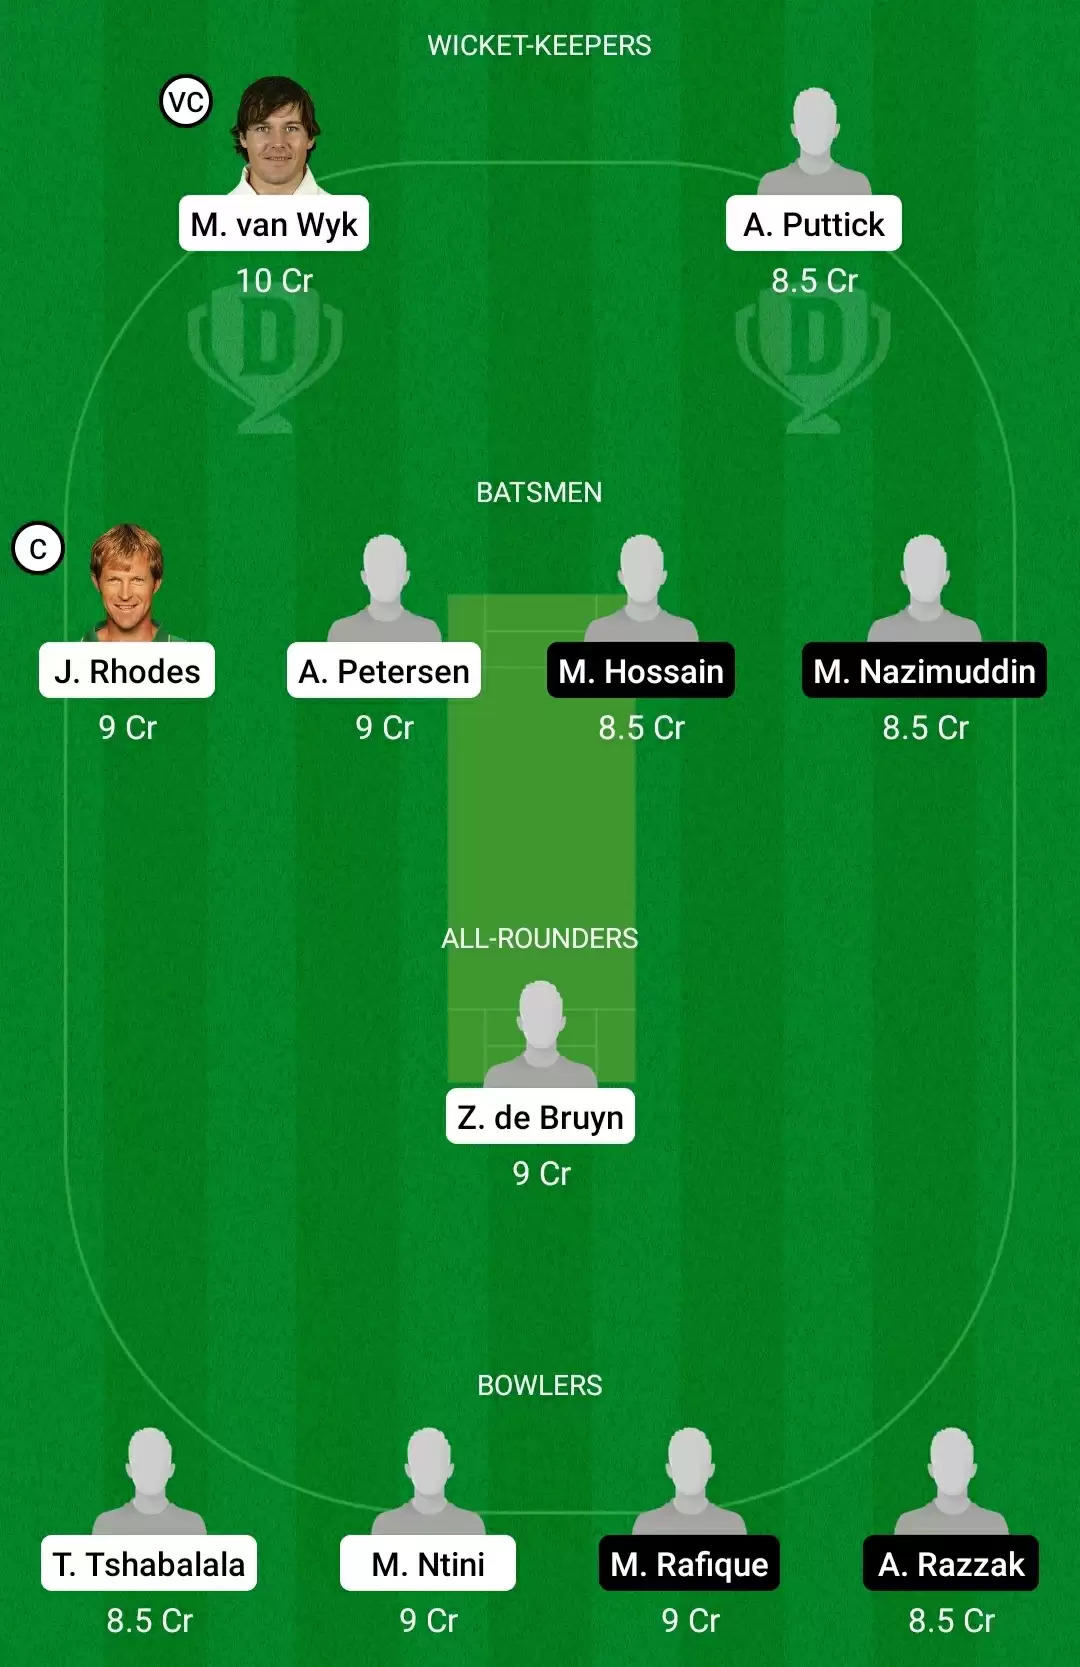 SA-L Vs BD-L Dream11 Team Prediction: South Africa Legends Vs Bangladesh Legends Best Fantasy Cricket Tips, Playing XI & Top Player Picks For Road Safety World Series T20 2020-21